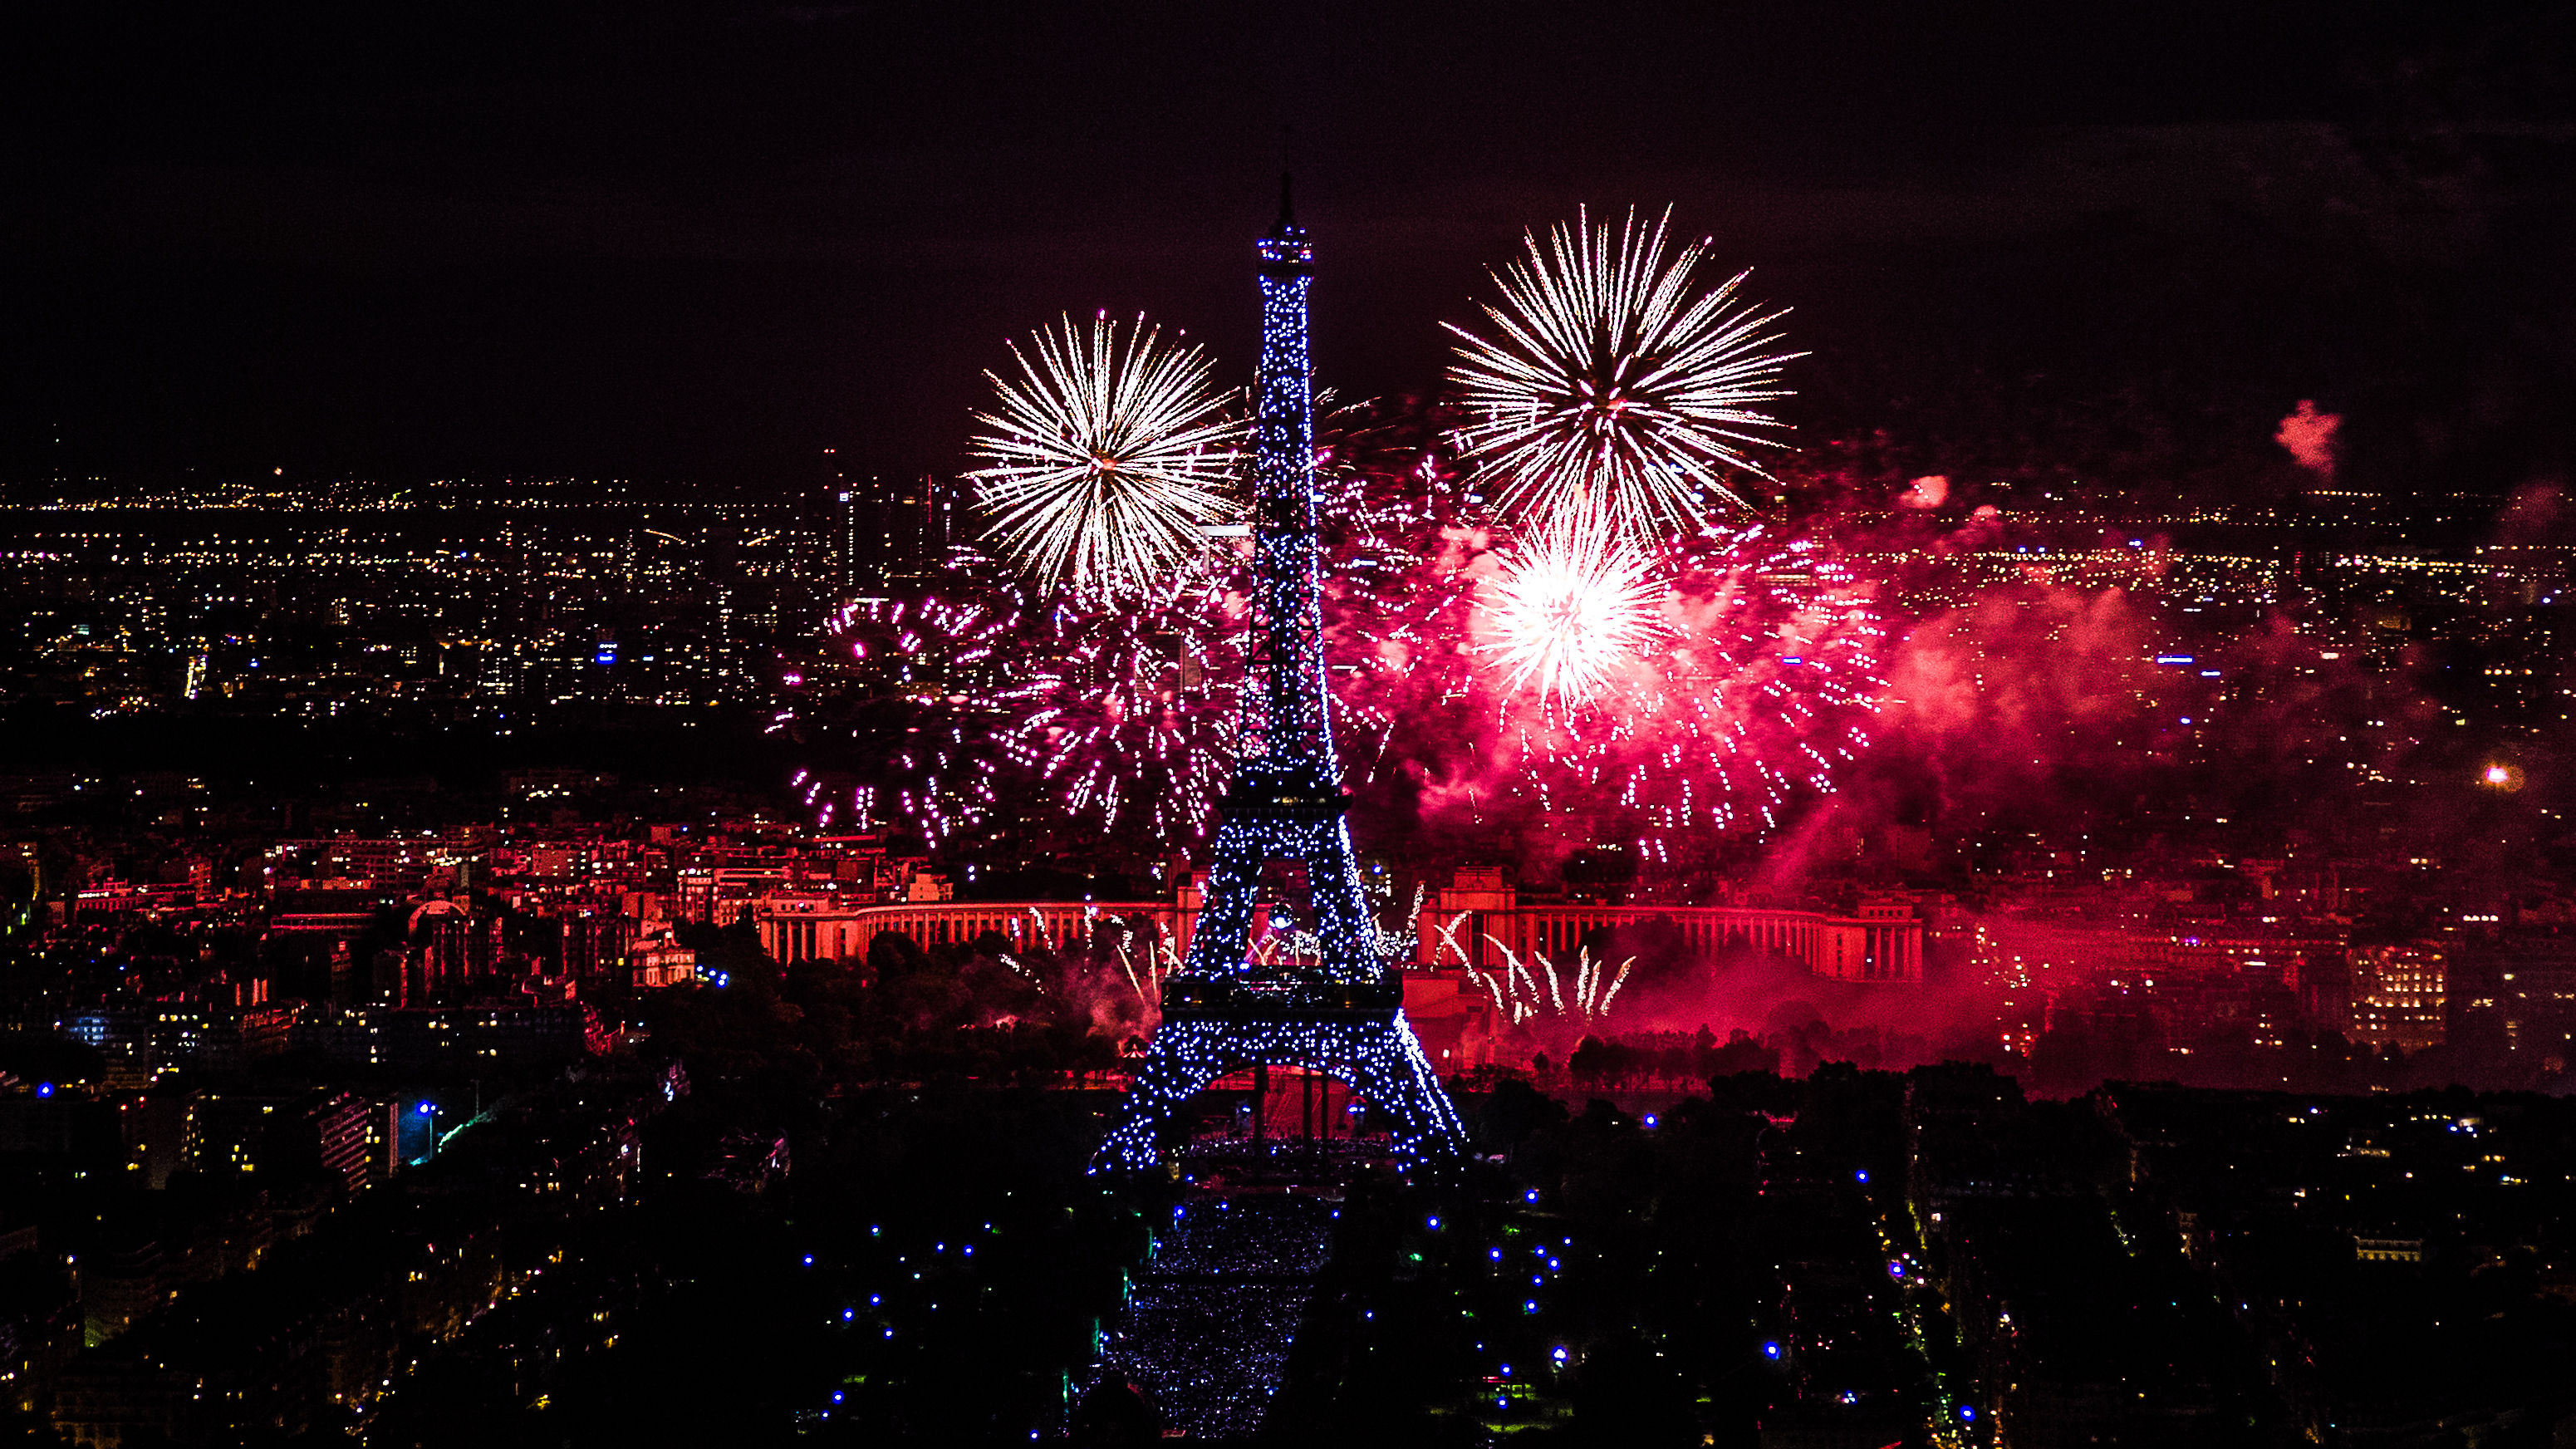 Eiffel Tower At Night With Fireworks HD Wallpaper Background Image